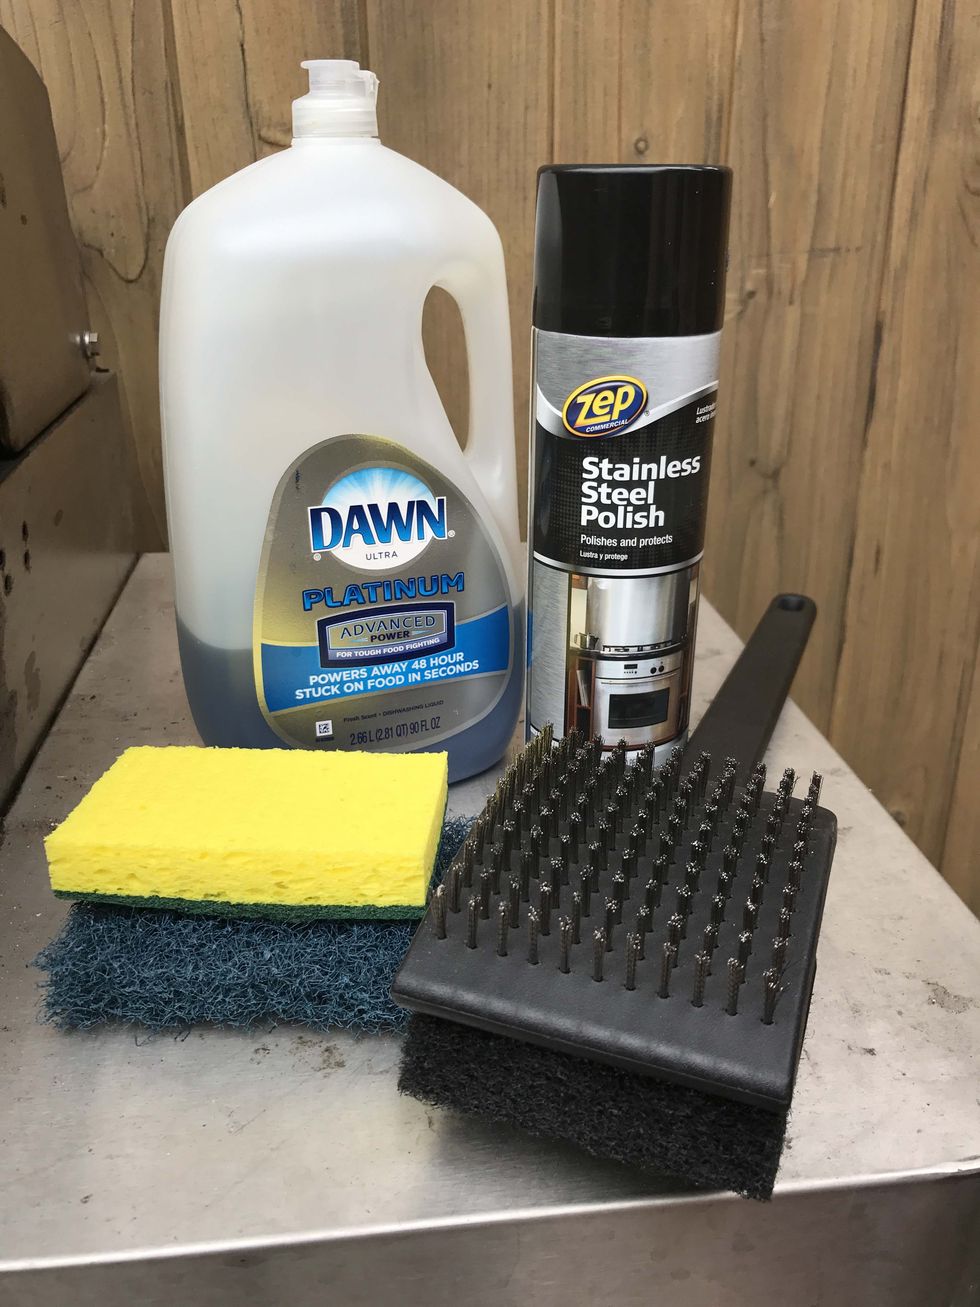 Cleaning Accessories - Industrial Brush - Baked on Food Remover - Electric  Smoker - Smokers and Grills - Drill Brush - BBQ Cleaning Kit - Rust Remover